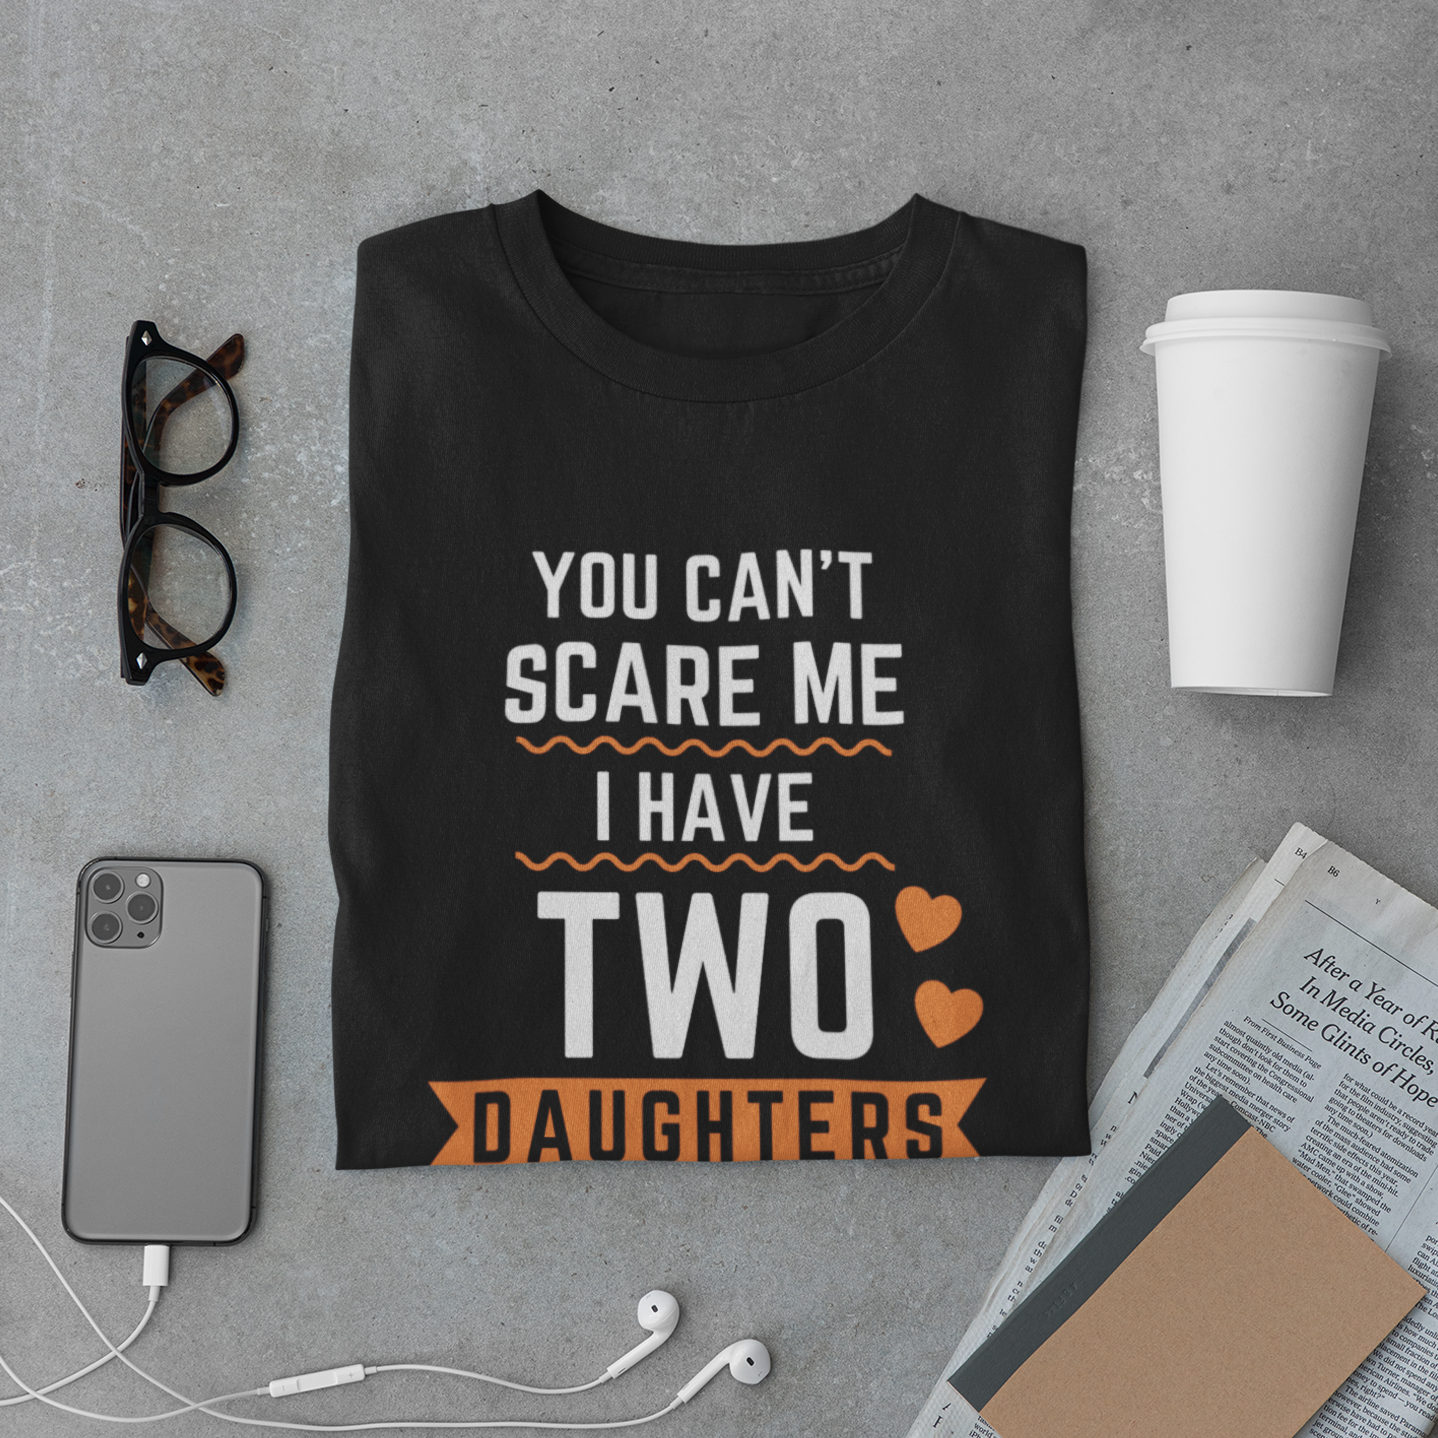 You Cant Scare Me I Have Two Daughters funny shirt quotes